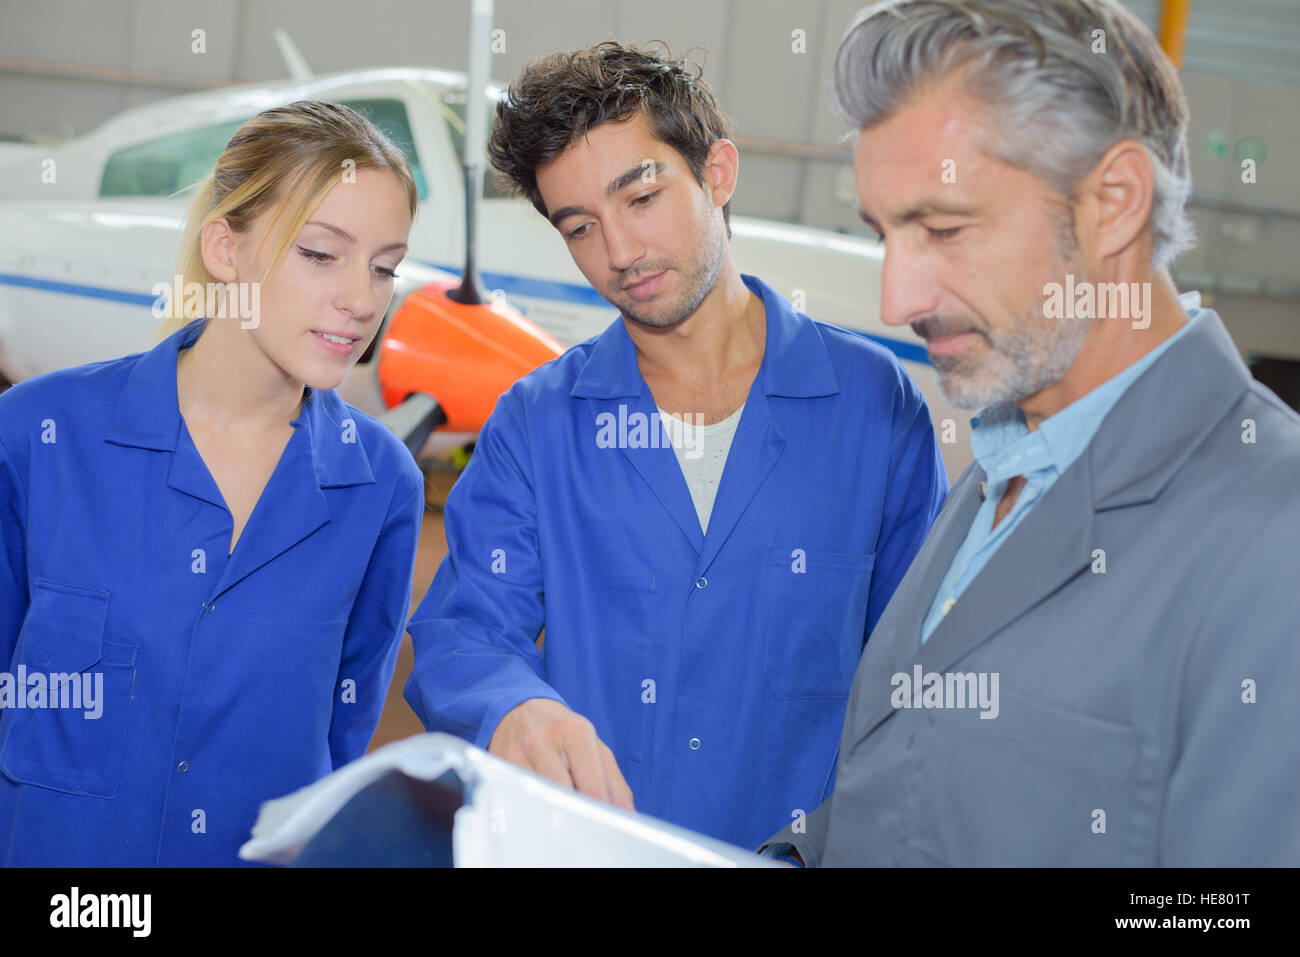 Students looking at reference book with instructor Stock Photo